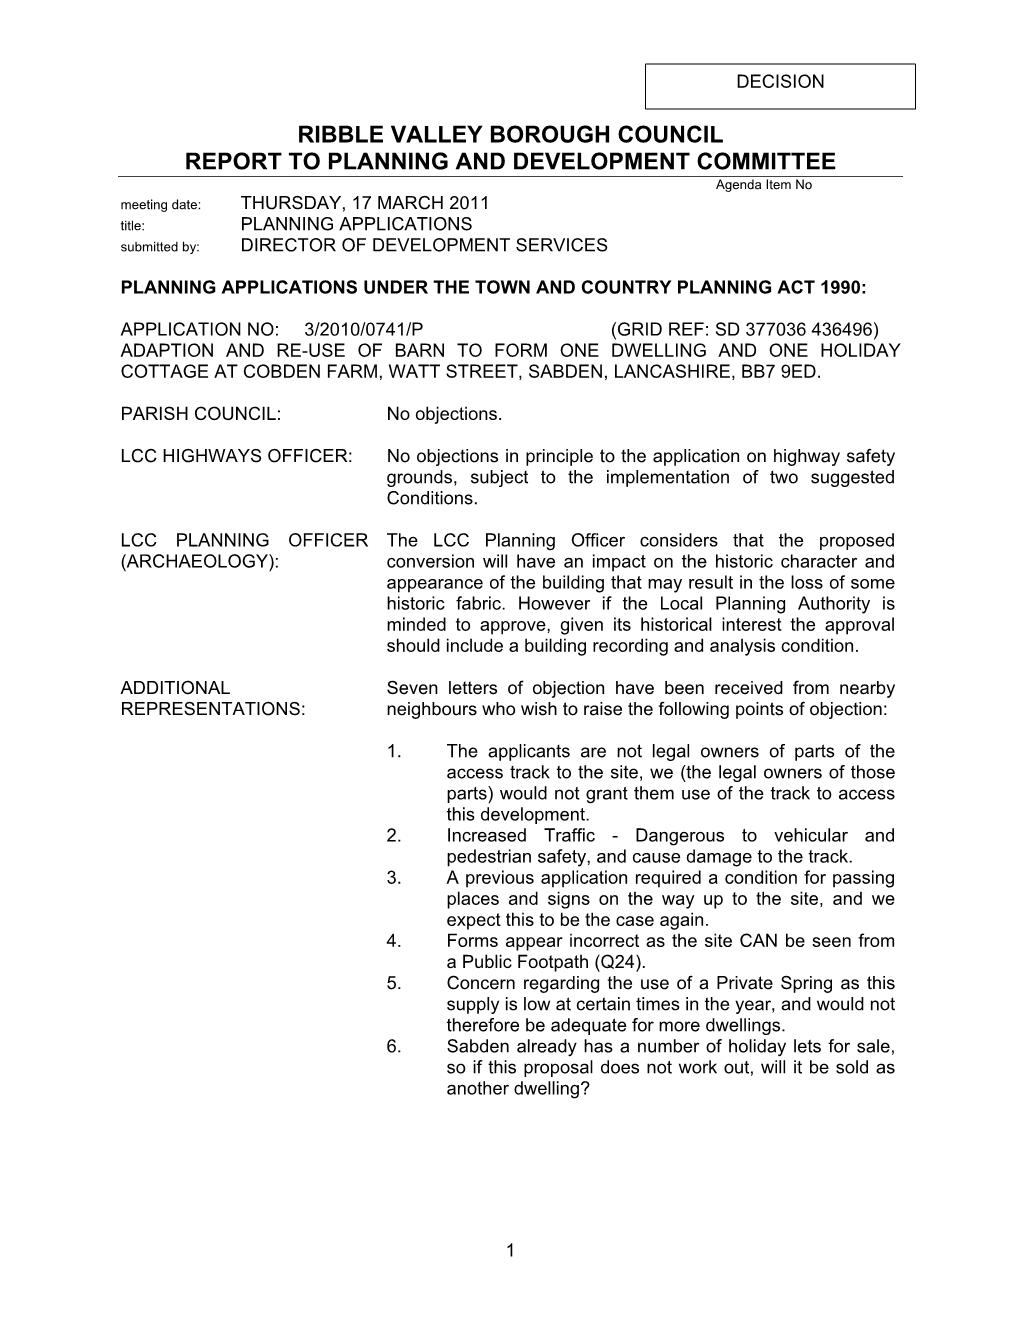 PLANNING APPLICATIONS Submitted By: DIRECTOR of DEVELOPMENT SERVICES